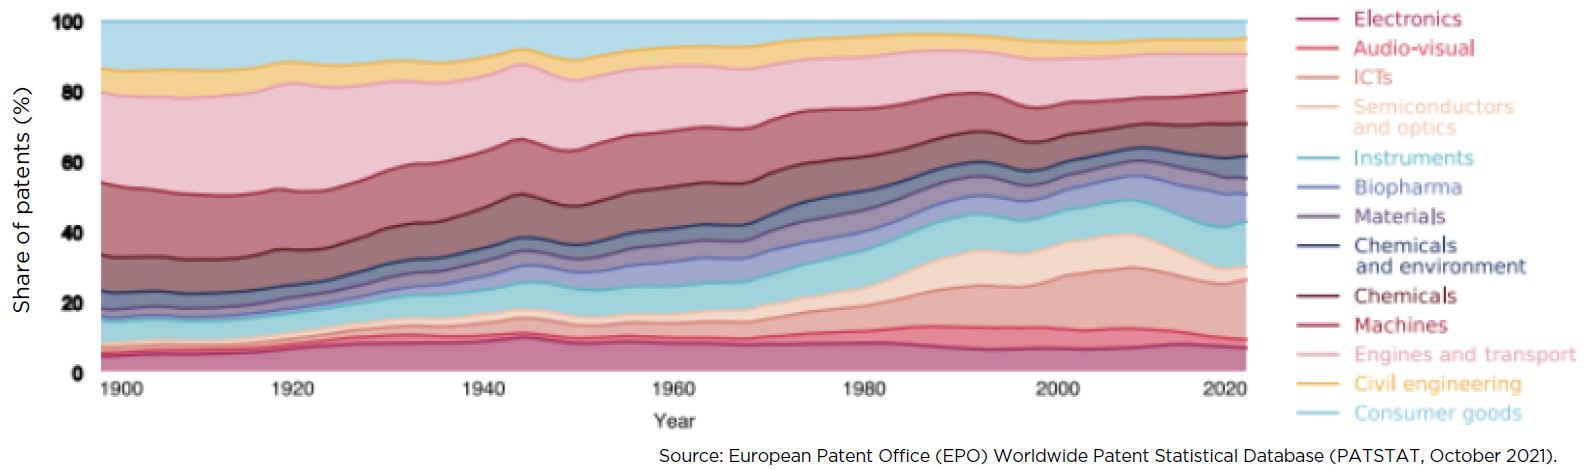 Shares of patents by technological field, 1900-2020